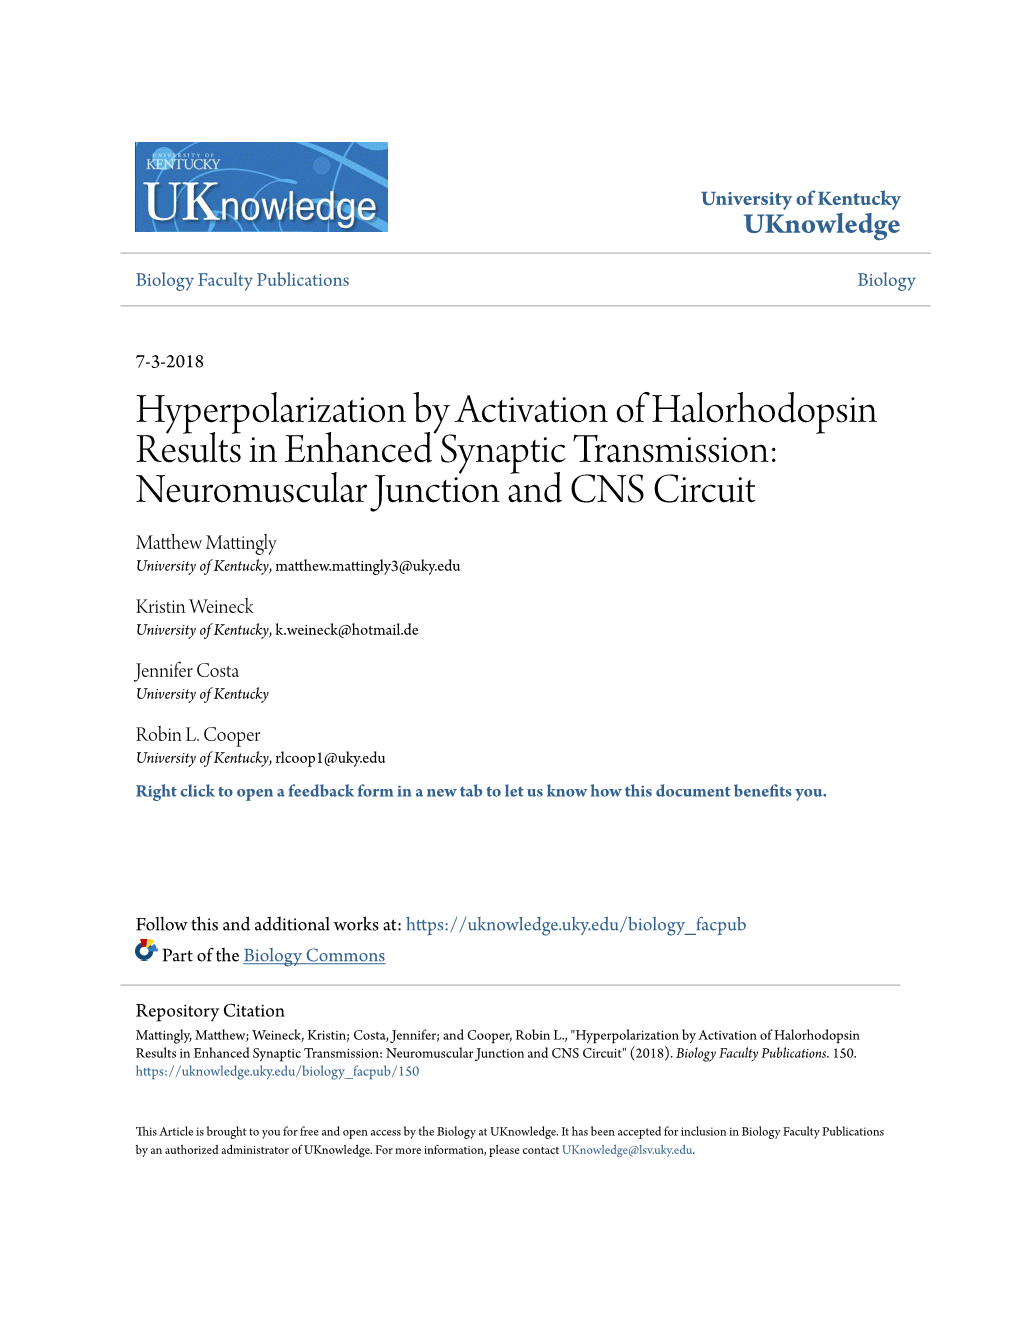 Hyperpolarization by Activation of Halorhodopsin Results in Enhanced Synaptic Transmission